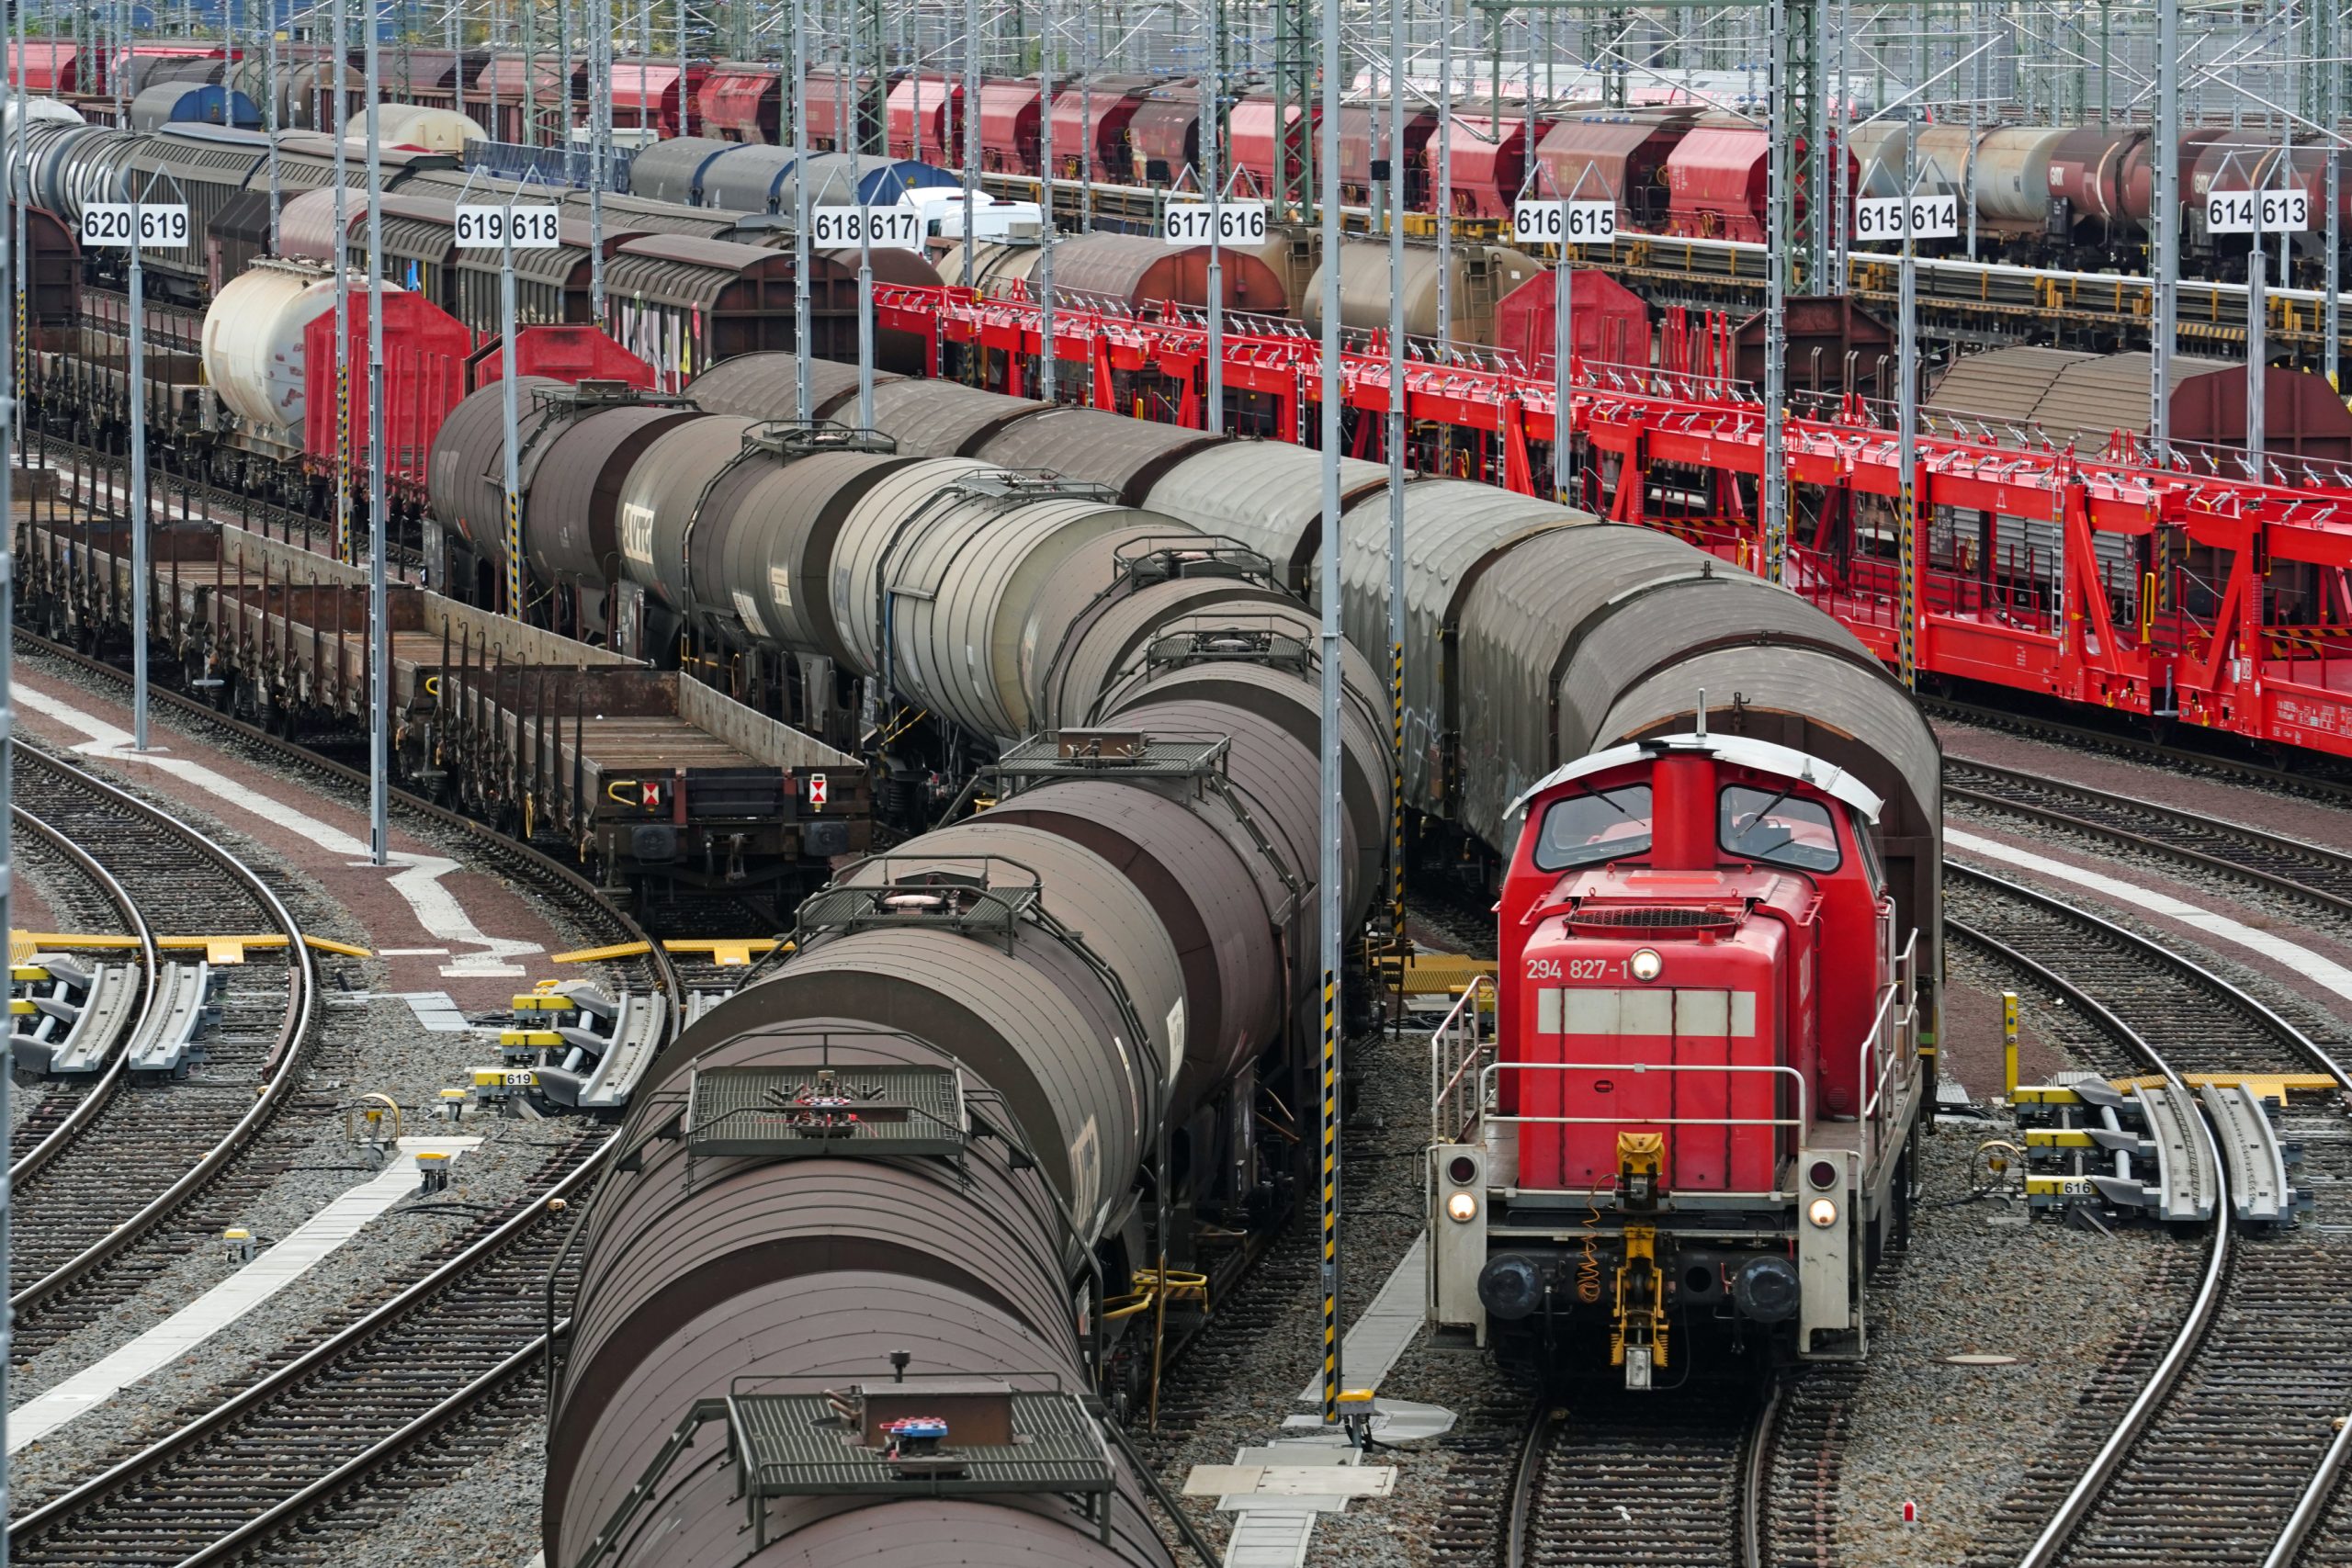 DB Cargo shunting operations in Halle (Saale) 